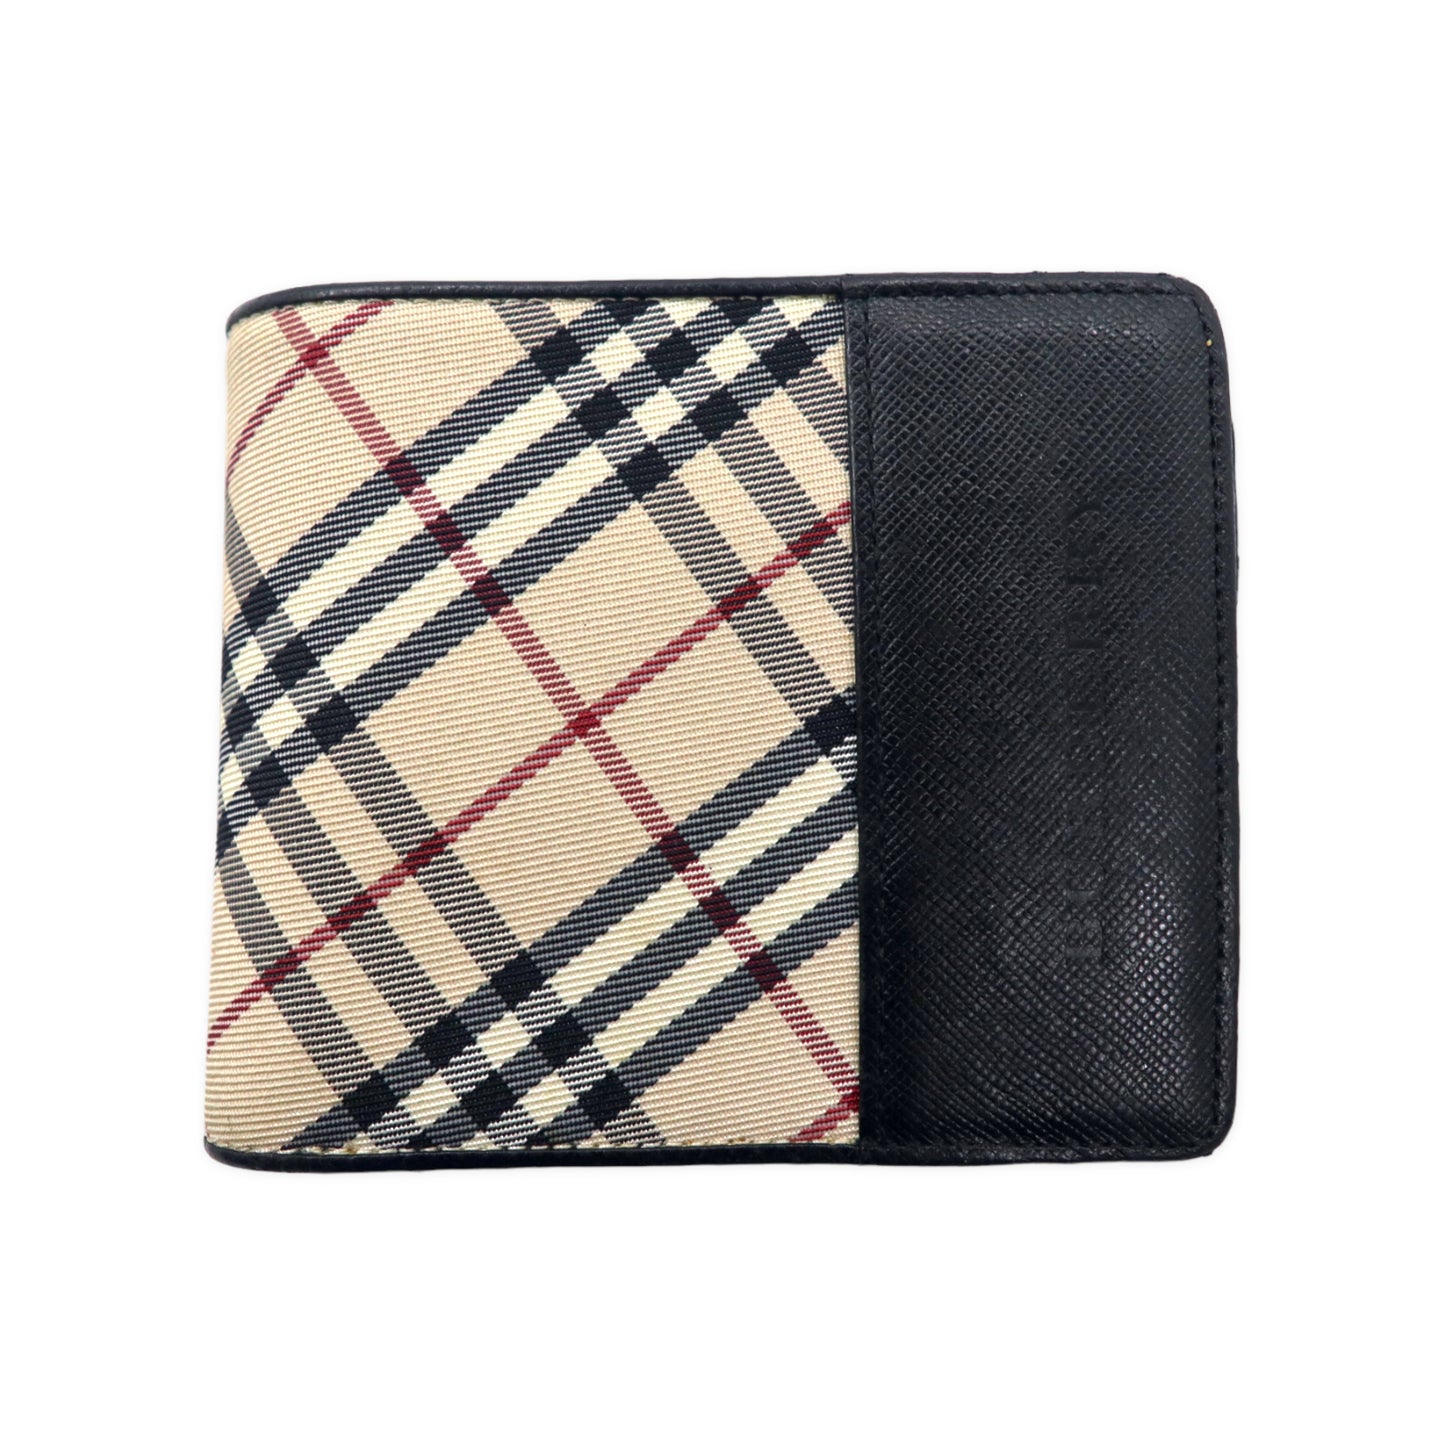 BURBERRY CHECKED FOLDING WALLET Compact wallet beige black nylon